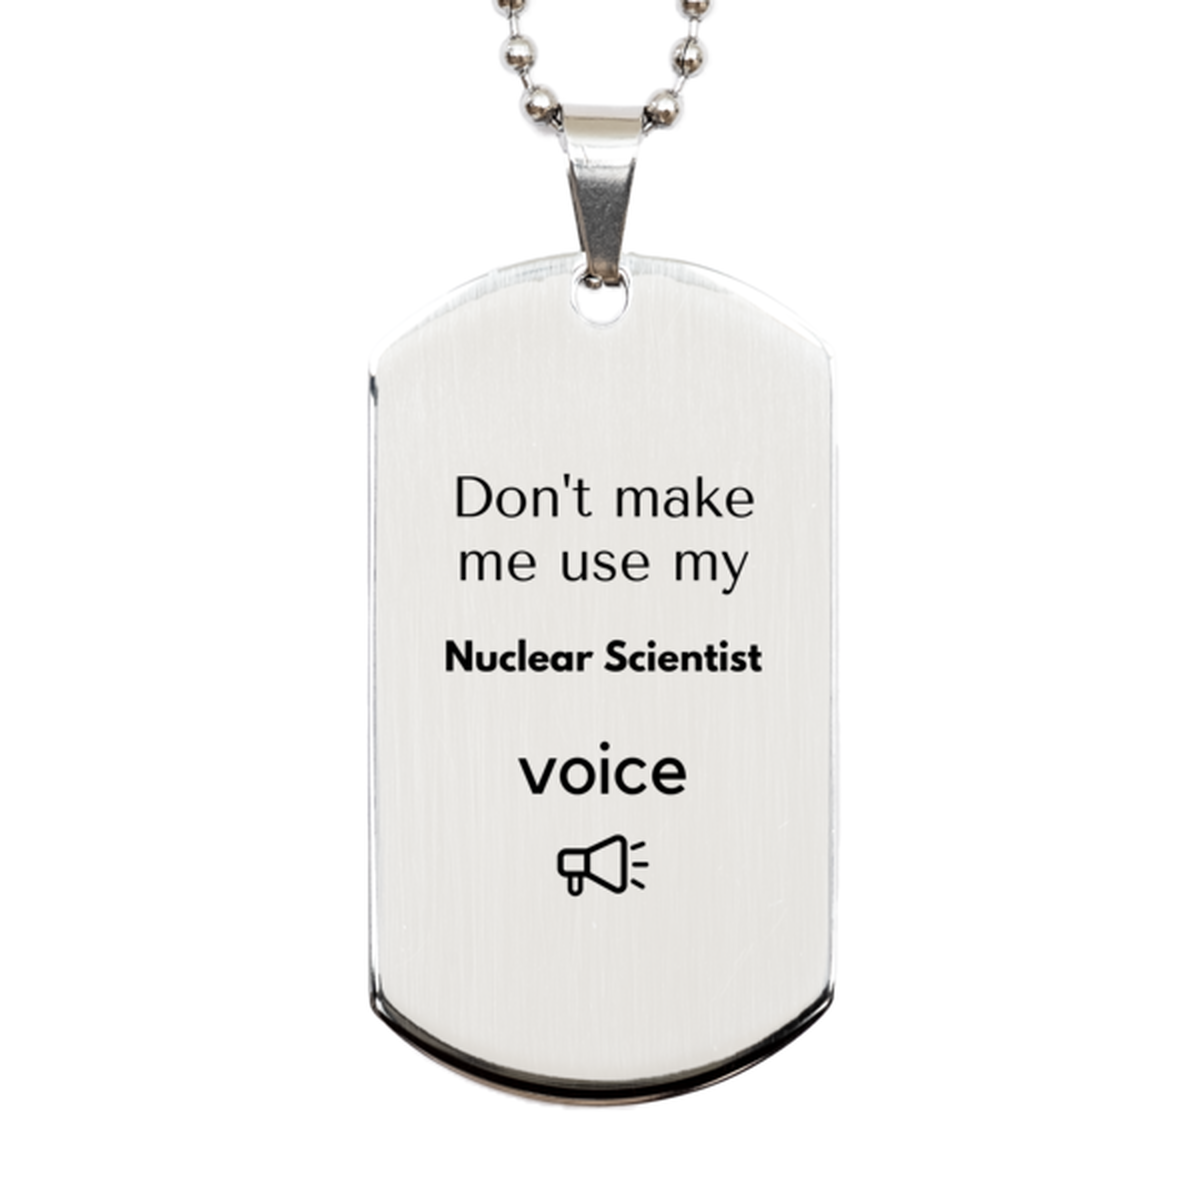 Don't make me use my Nuclear Scientist voice, Sarcasm Nuclear Scientist Gifts, Christmas Nuclear Scientist Silver Dog Tag Birthday Unique Gifts For Nuclear Scientist Coworkers, Men, Women, Colleague, Friends